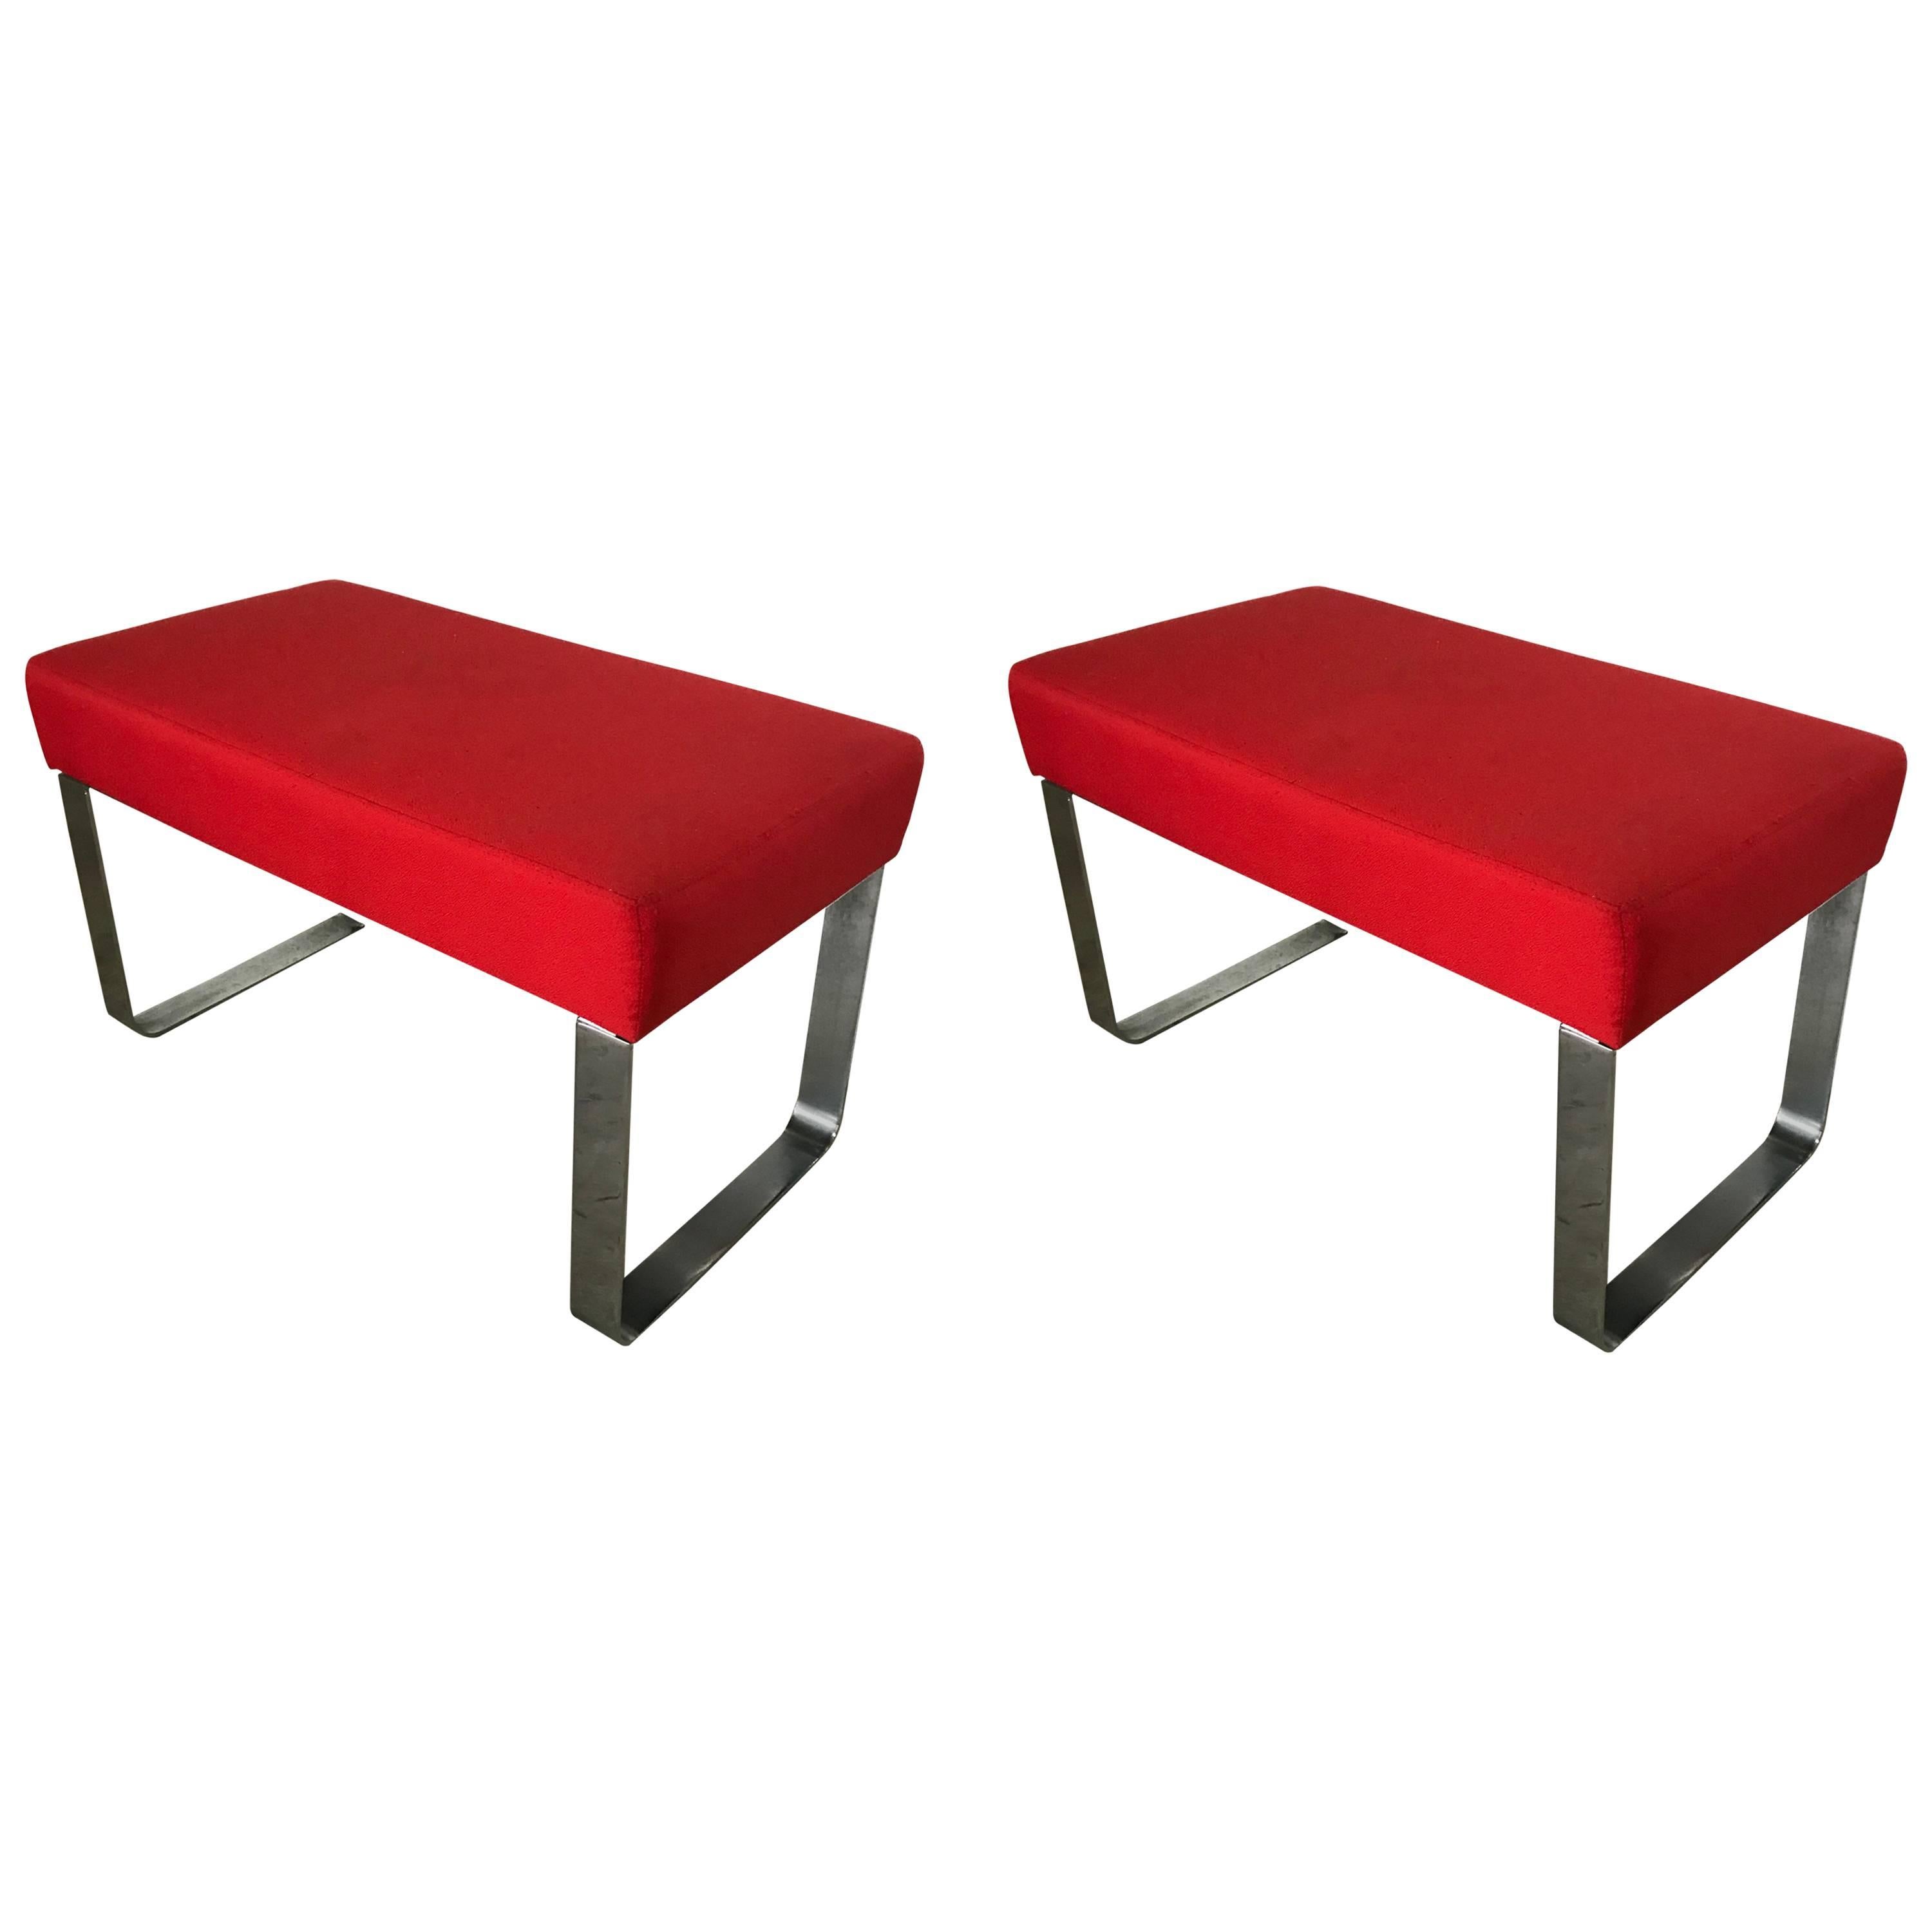 Modern Chrome and Red Bench or Stool Milo Baughman or Pace Style